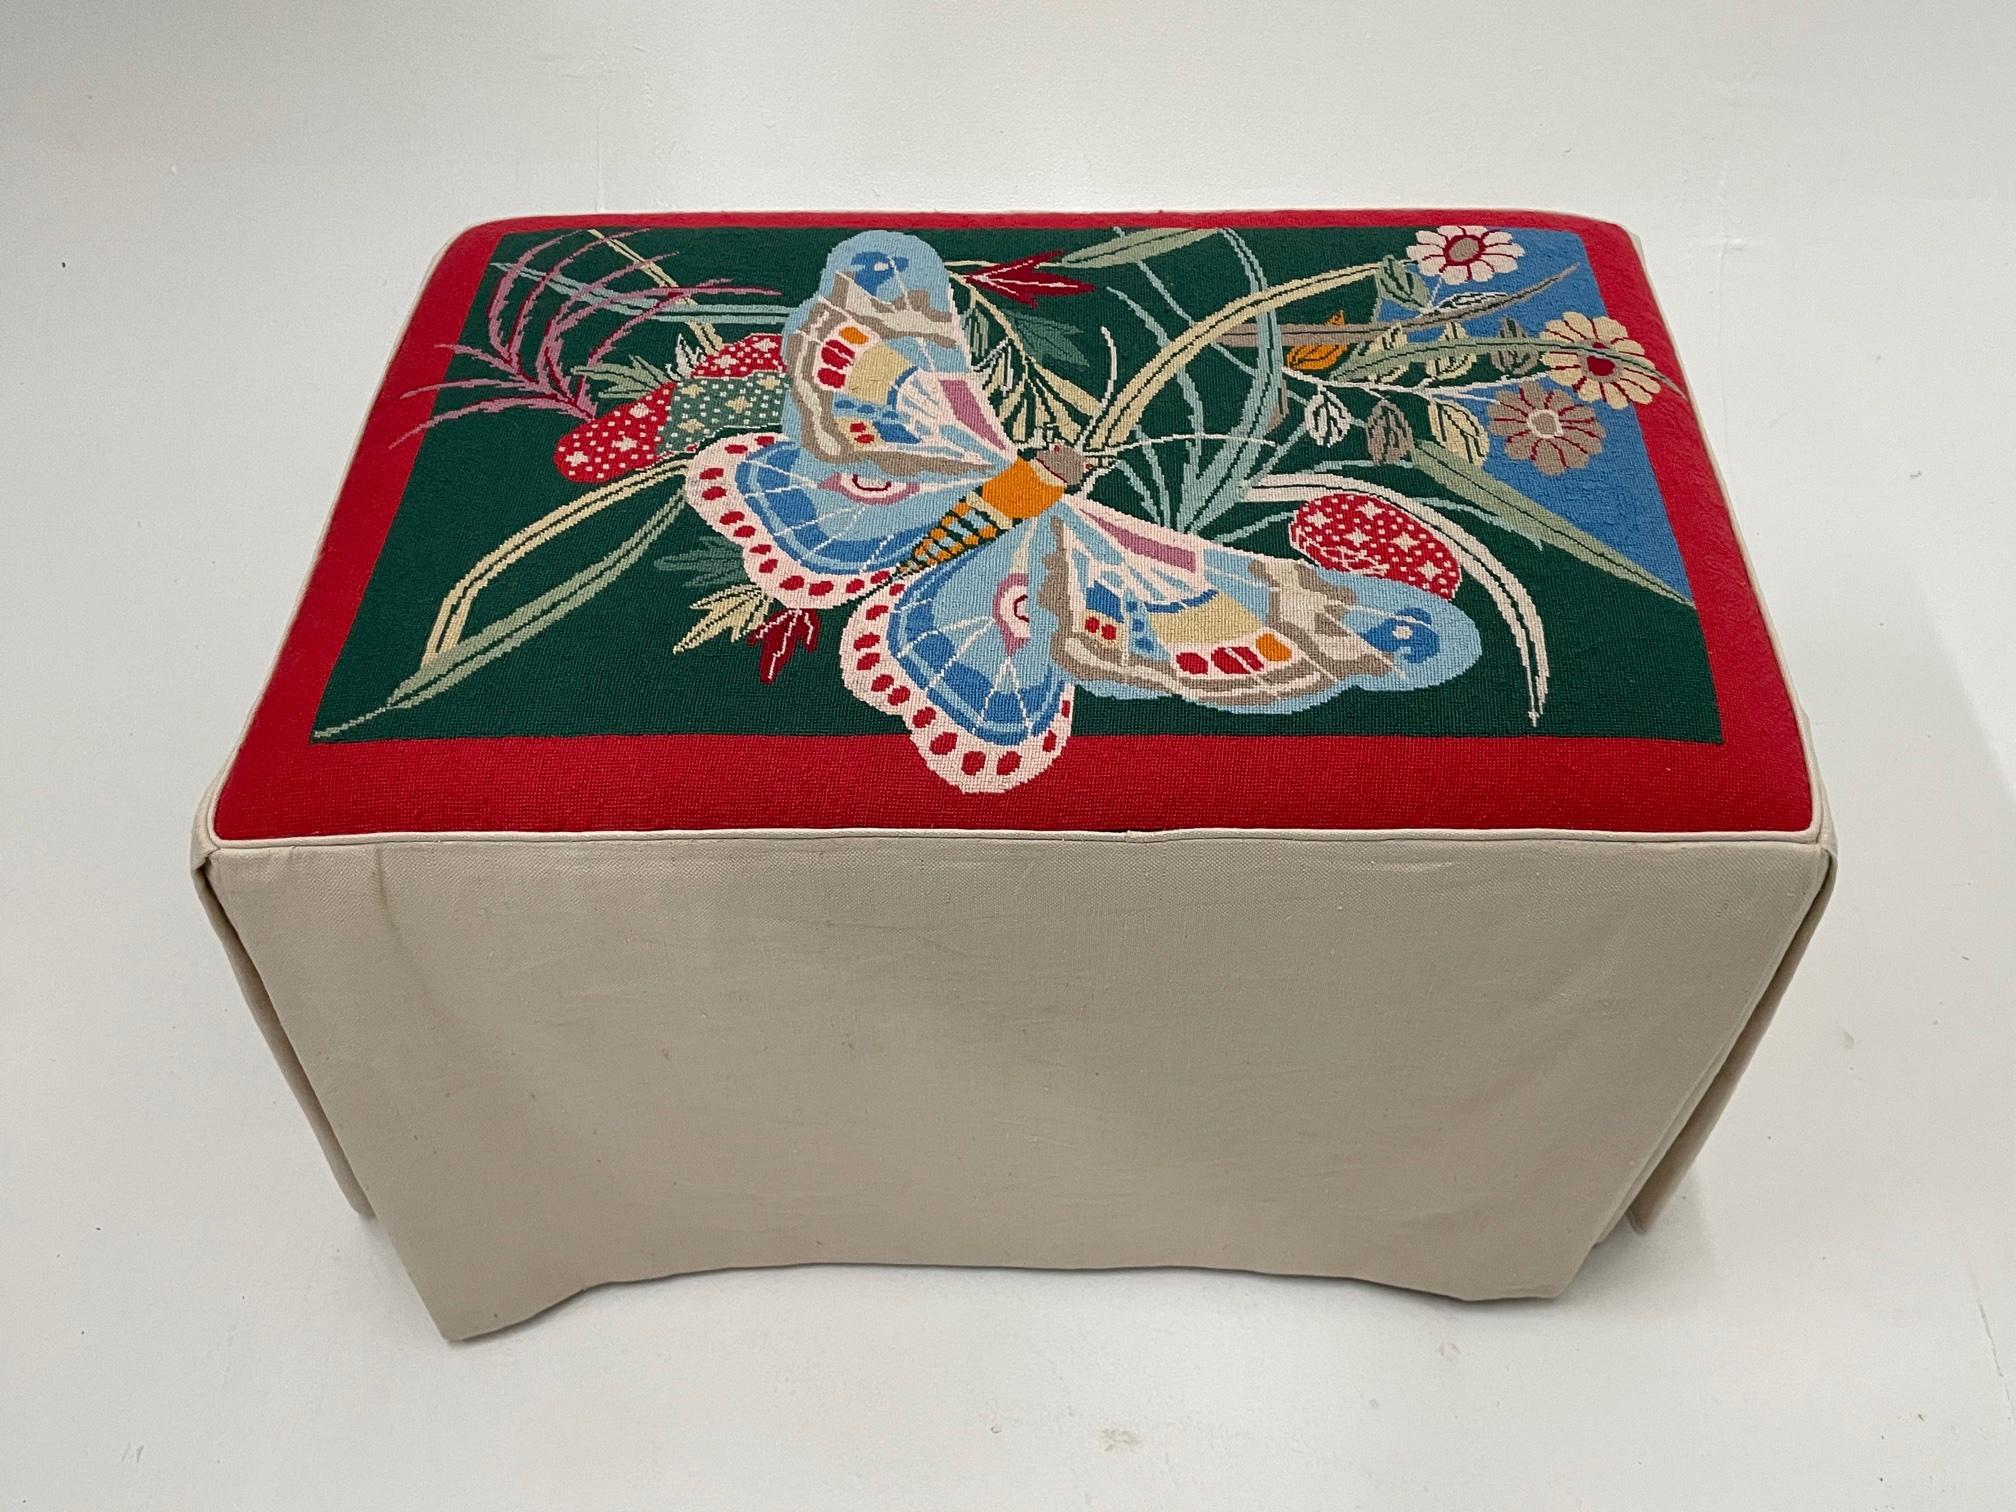 North American One of a Kind Handmade Needlepoint Bench with Butterfly For Sale